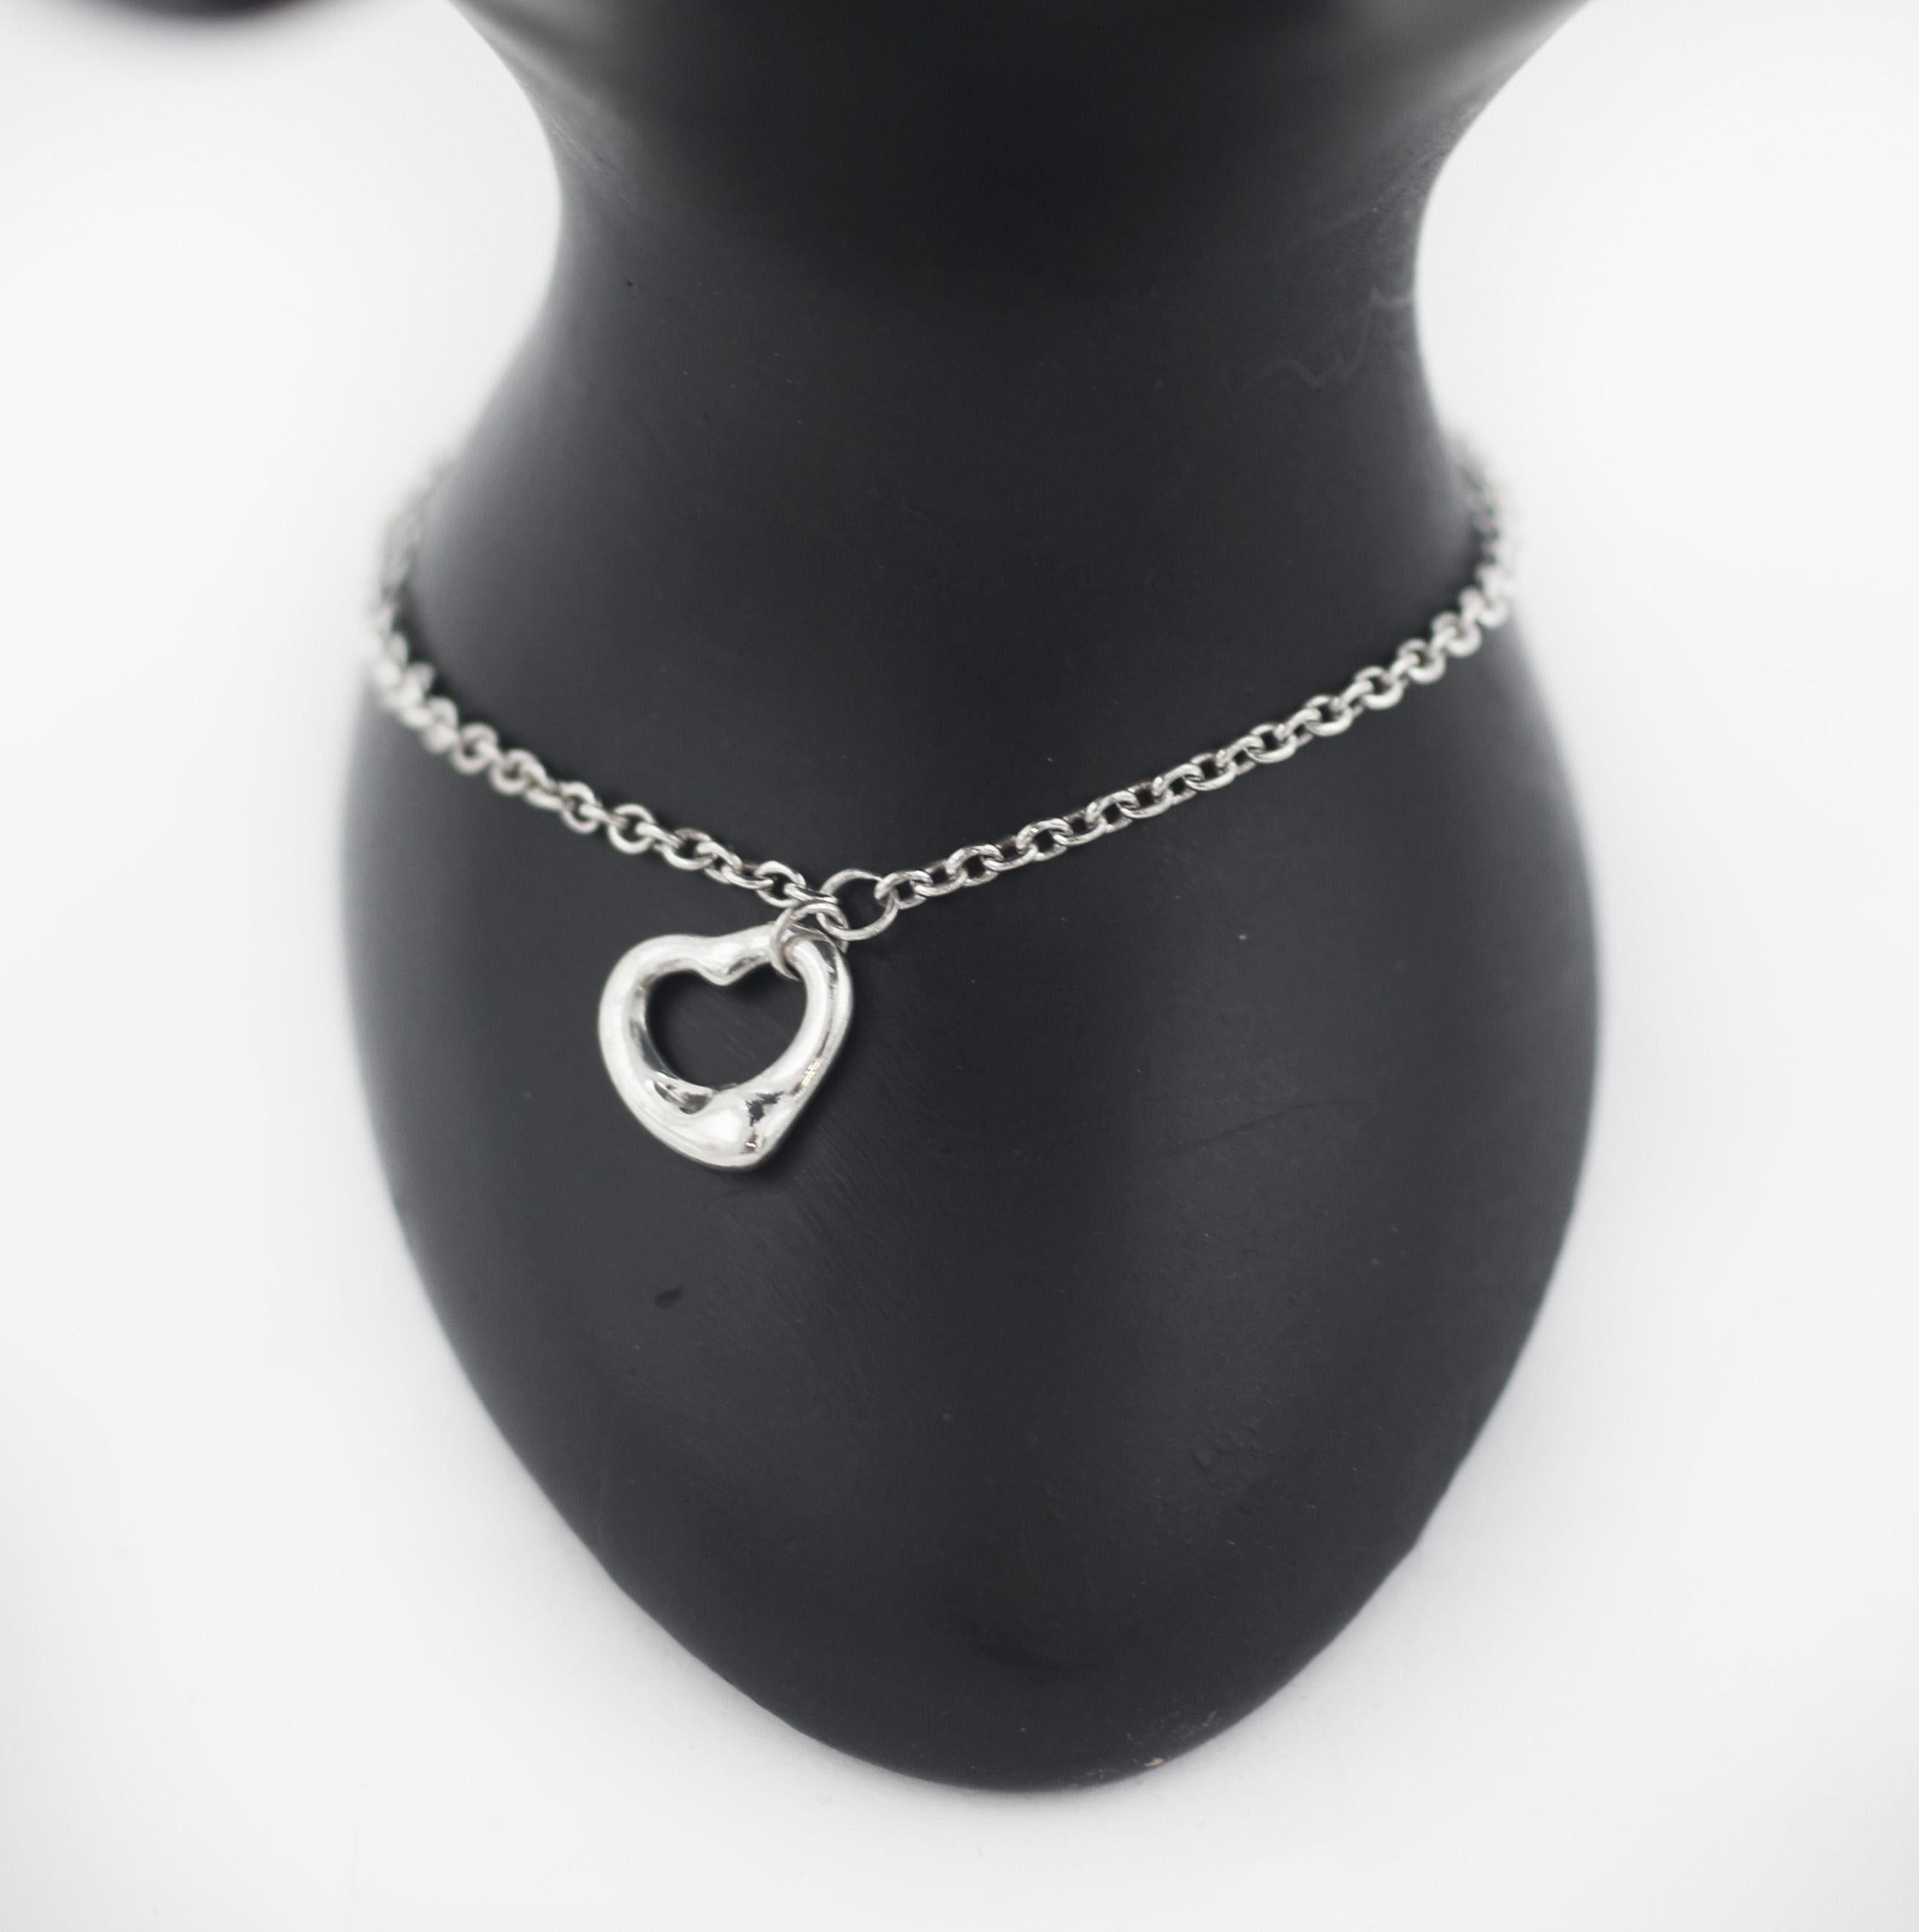 Tiffany & CO.
Elsa Peretti
Open Heart Bracelet
The simple, evocative shape of Elsa Peretti Open Heart designs celebrates the spirit of love. A delicate heart charm adds an elegant touch to this design.
Sterling silver
11mm heart
Size large 7.5